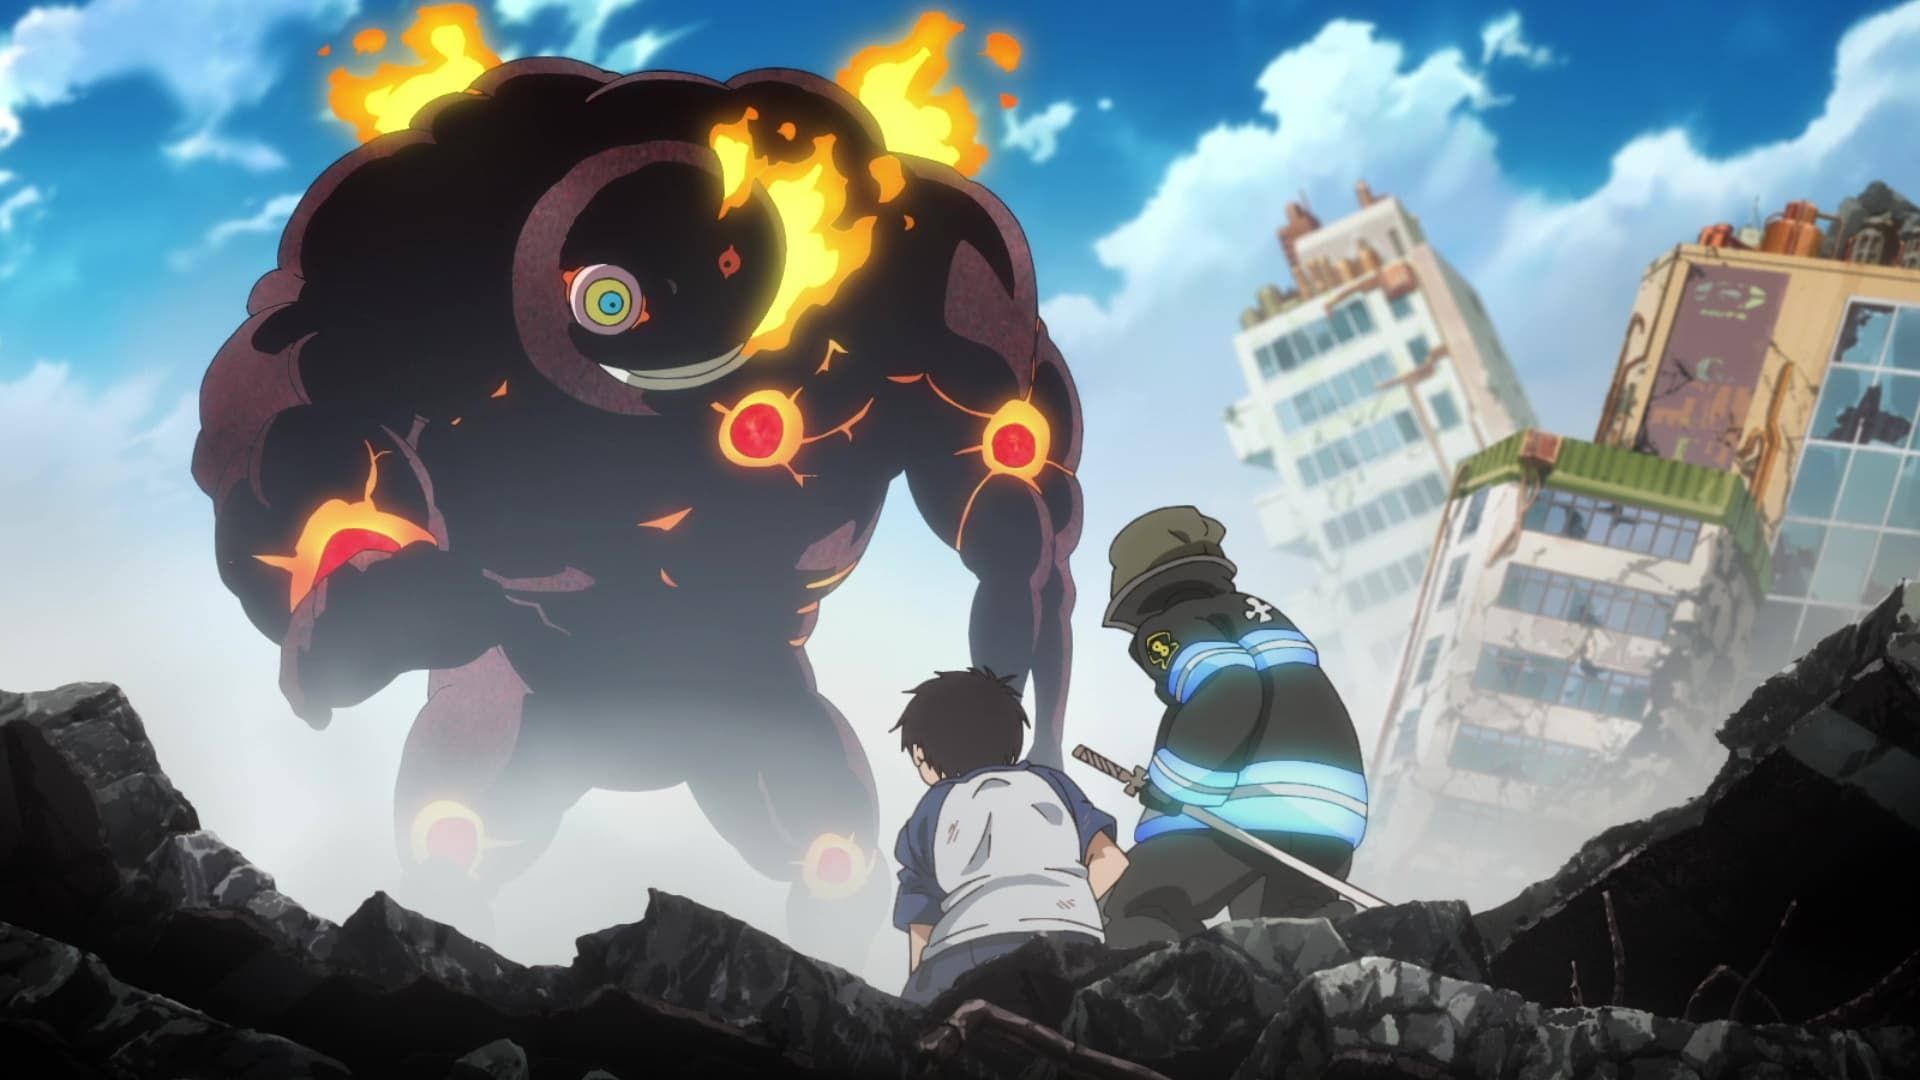 Fire Force: Season 2 - The Holy Woman's Anguish / The Man, Assault